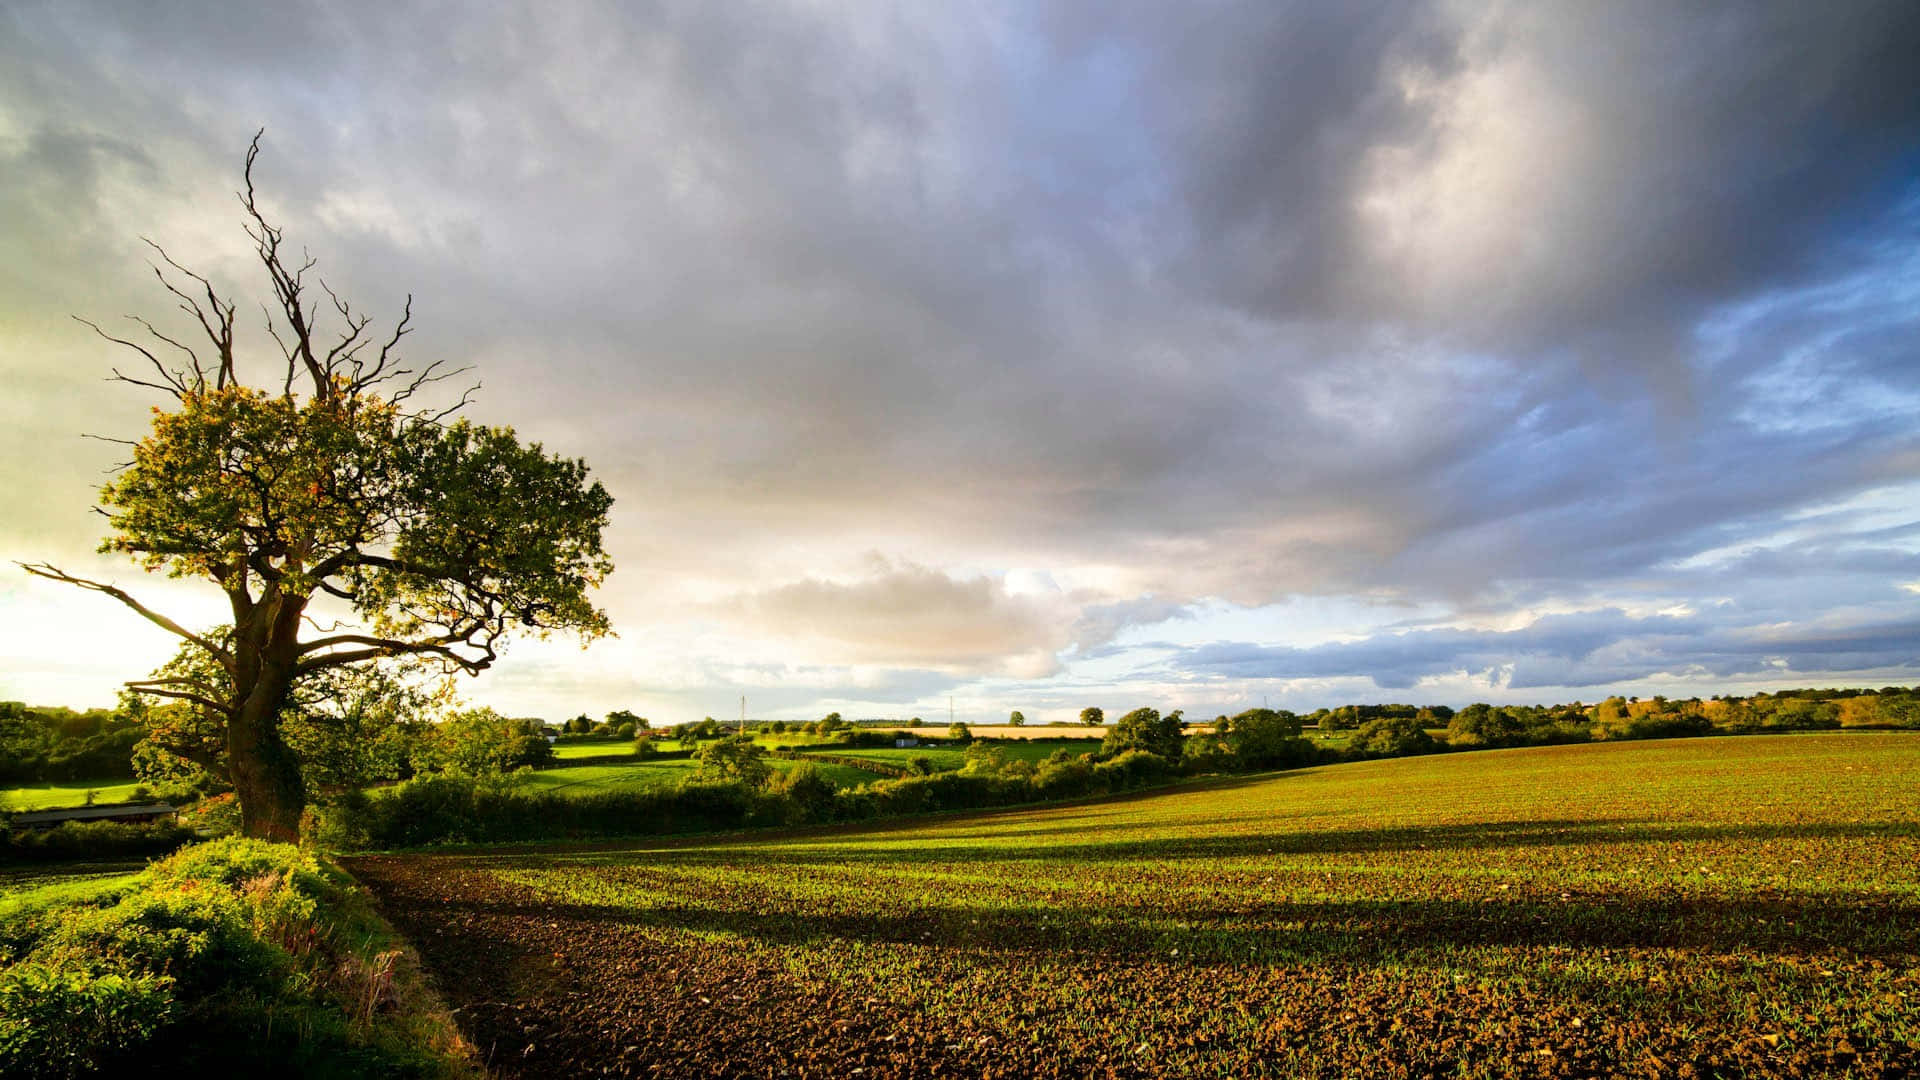 English Countryside And Cloudy Skies Wallpaper